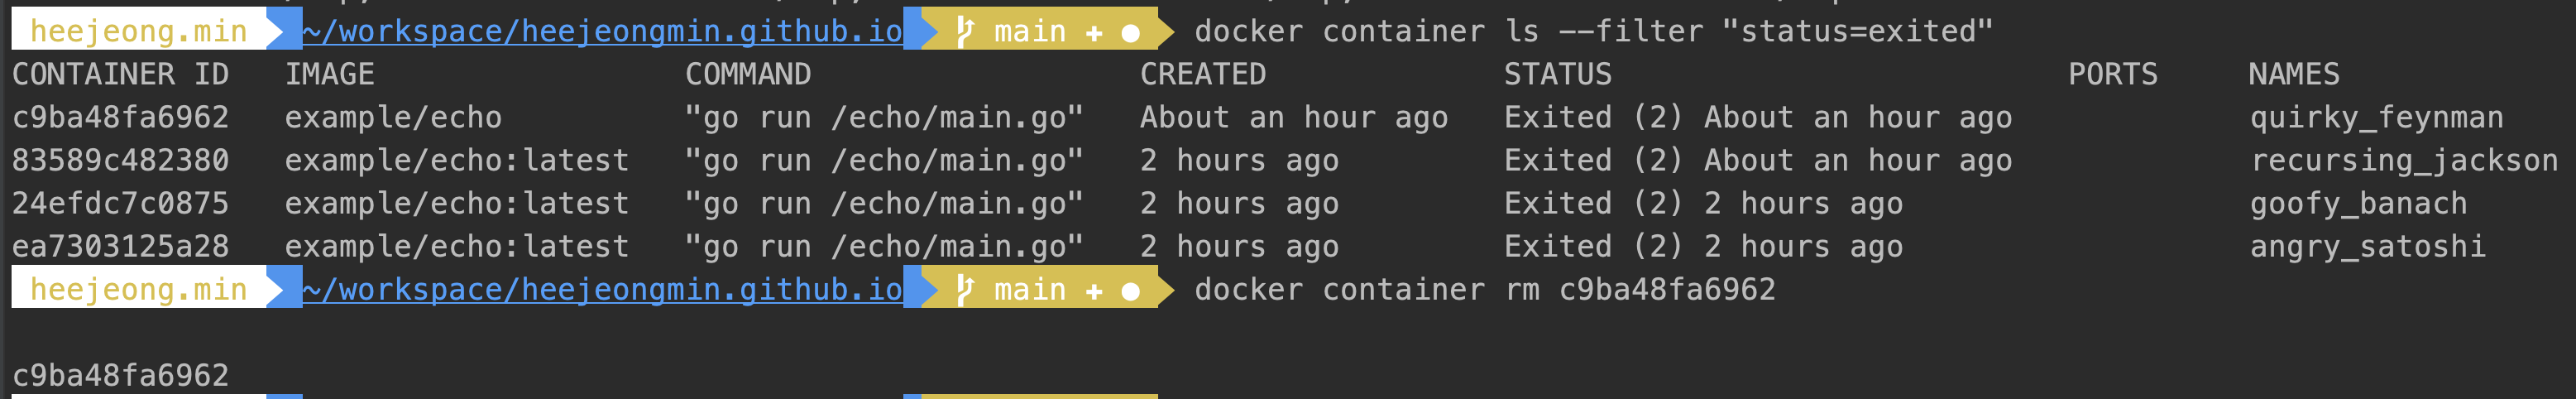 container_rm.png